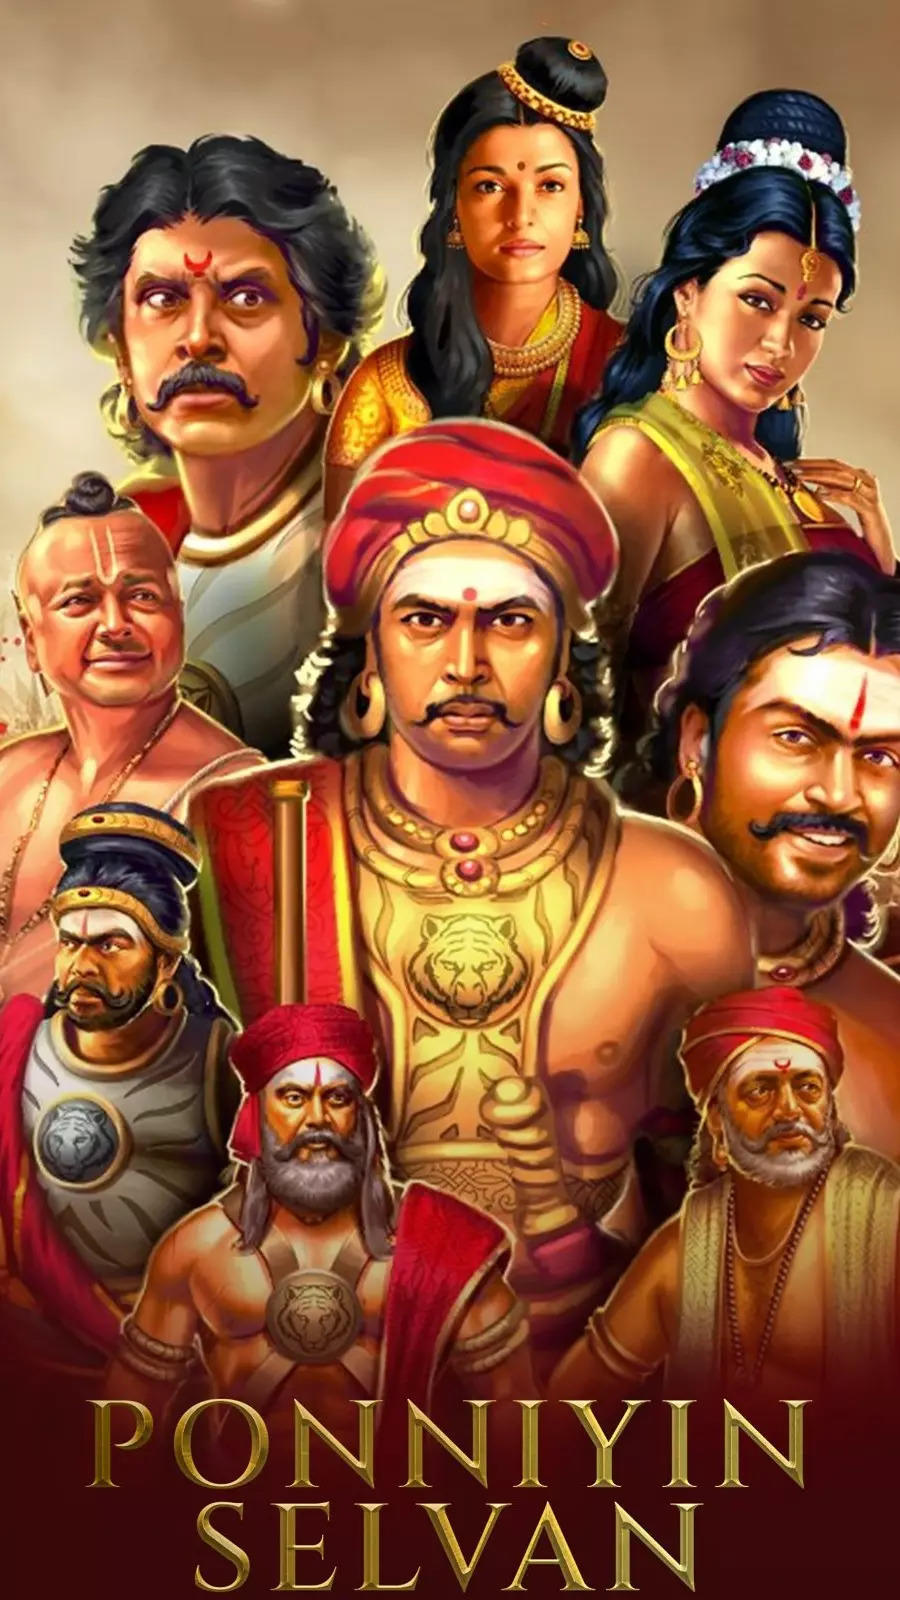 Ponniyin Selvan 1 - Impressive looks from the movie | Times of India